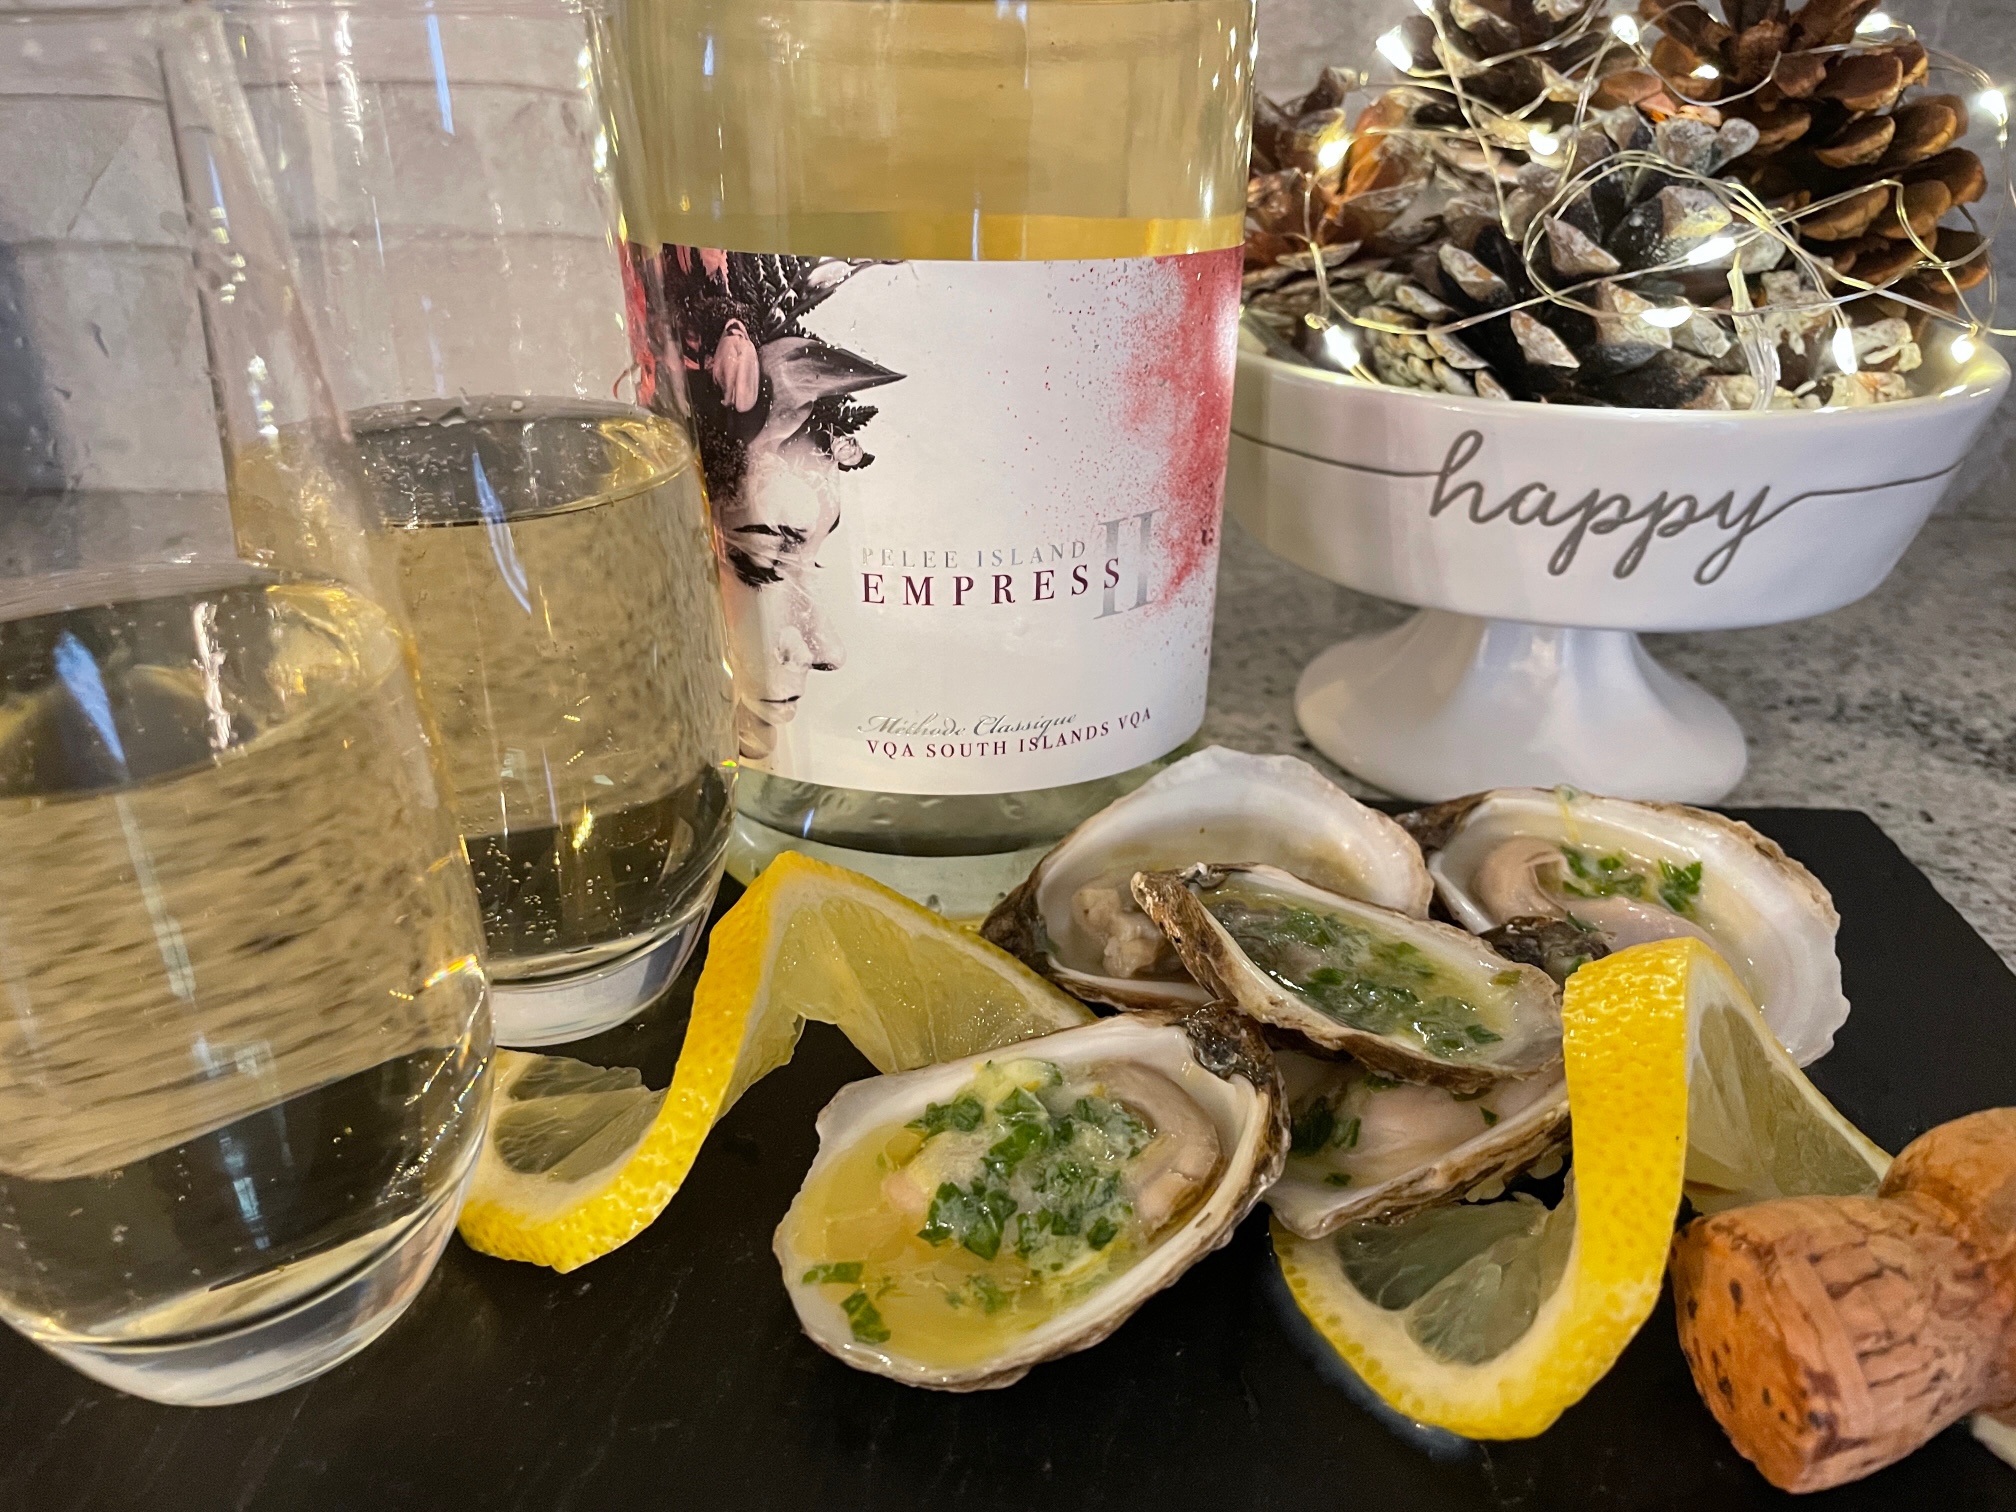 Featured image for “Pelee Island 2019 Empress II Sparkling w Grilled Oysters & Herb Butter.”